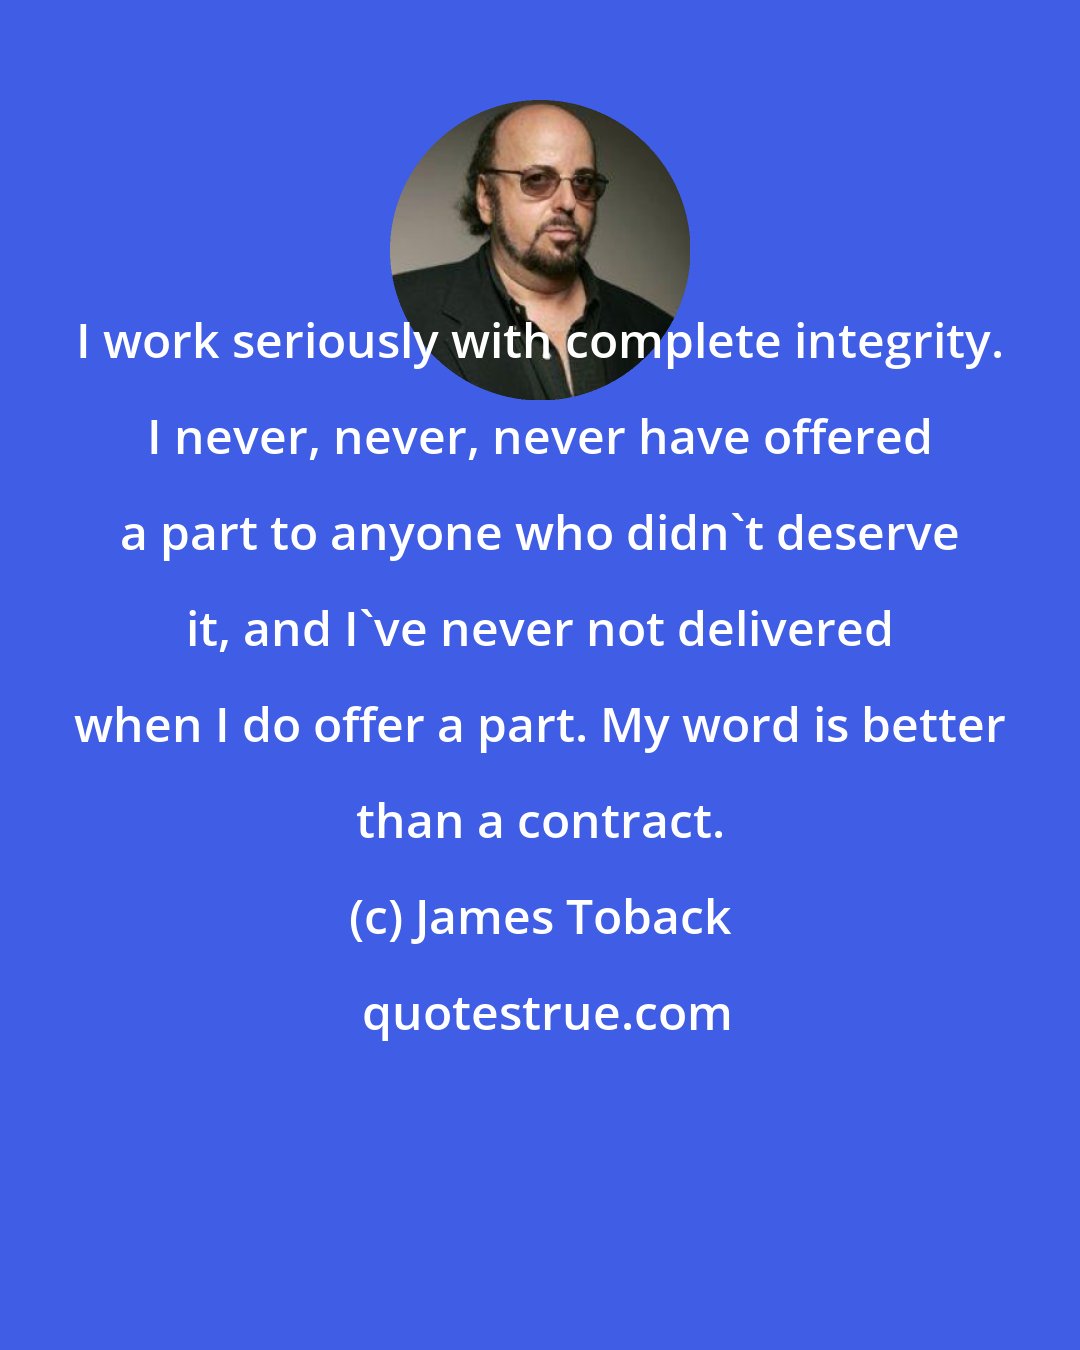 James Toback: I work seriously with complete integrity. I never, never, never have offered a part to anyone who didn't deserve it, and I've never not delivered when I do offer a part. My word is better than a contract.